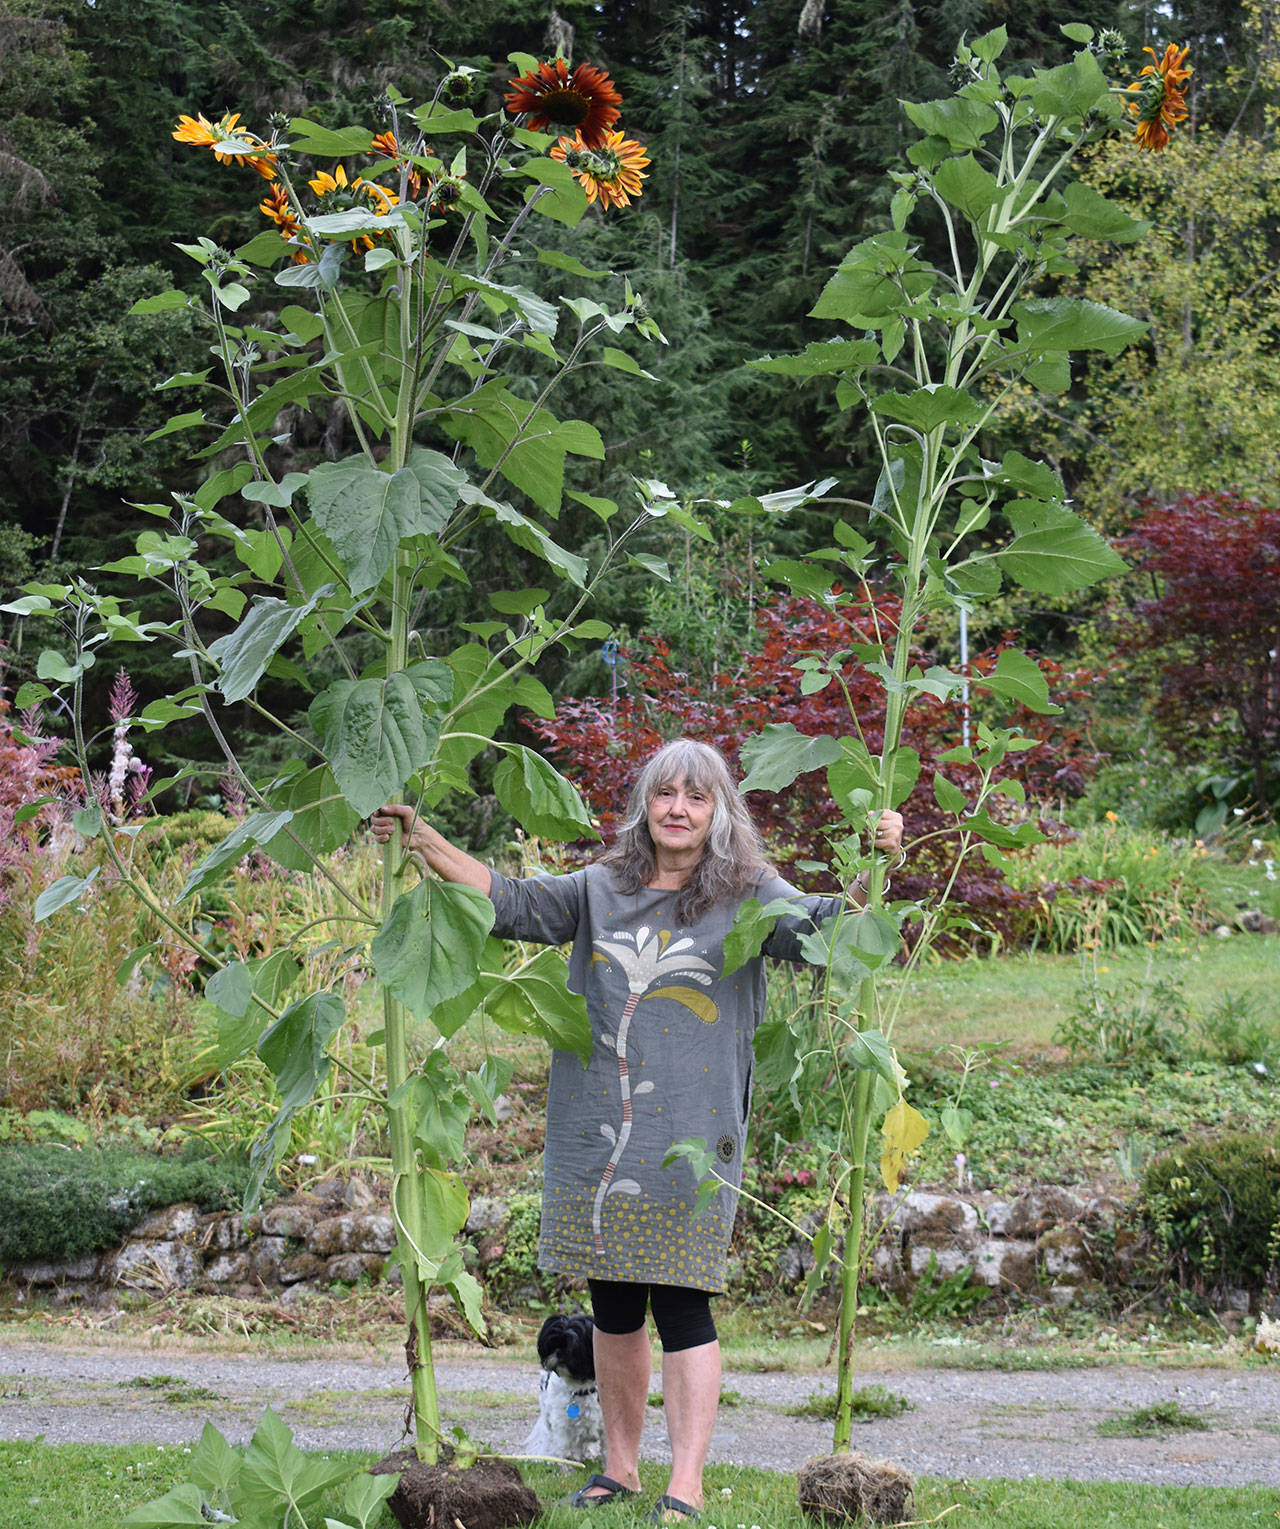 Margaret “Peggy” Baker shows off sunflower cultivar grown in a Sequim-area organic garden. These, Norm Baker says, were supposed to be 5 feet tall but have exceeded expectations using biochar. Photo courtesy of Norm Baker